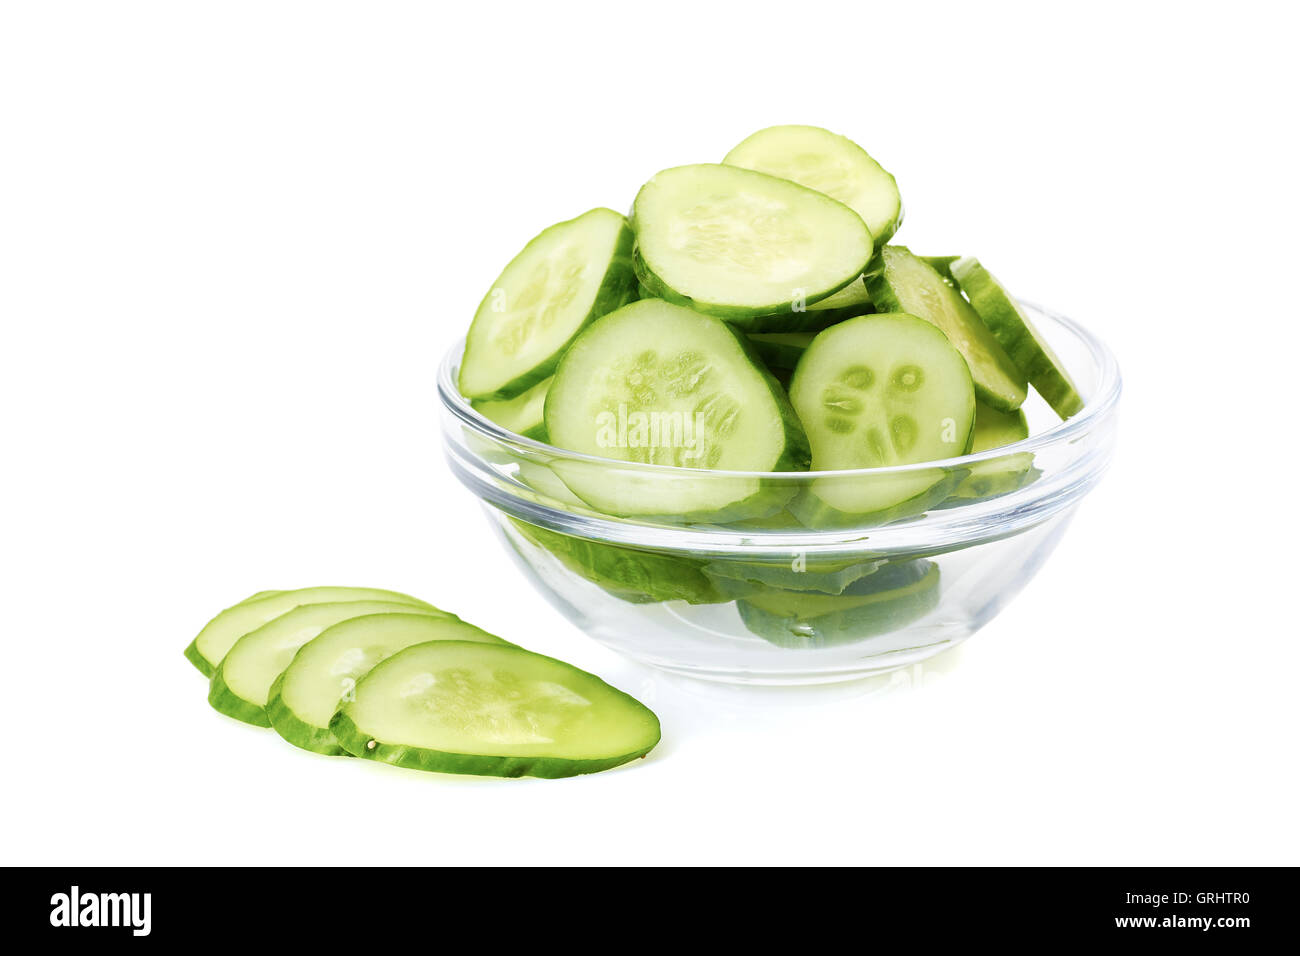 Sliced cucumber in glass bowl on white Stock Photo